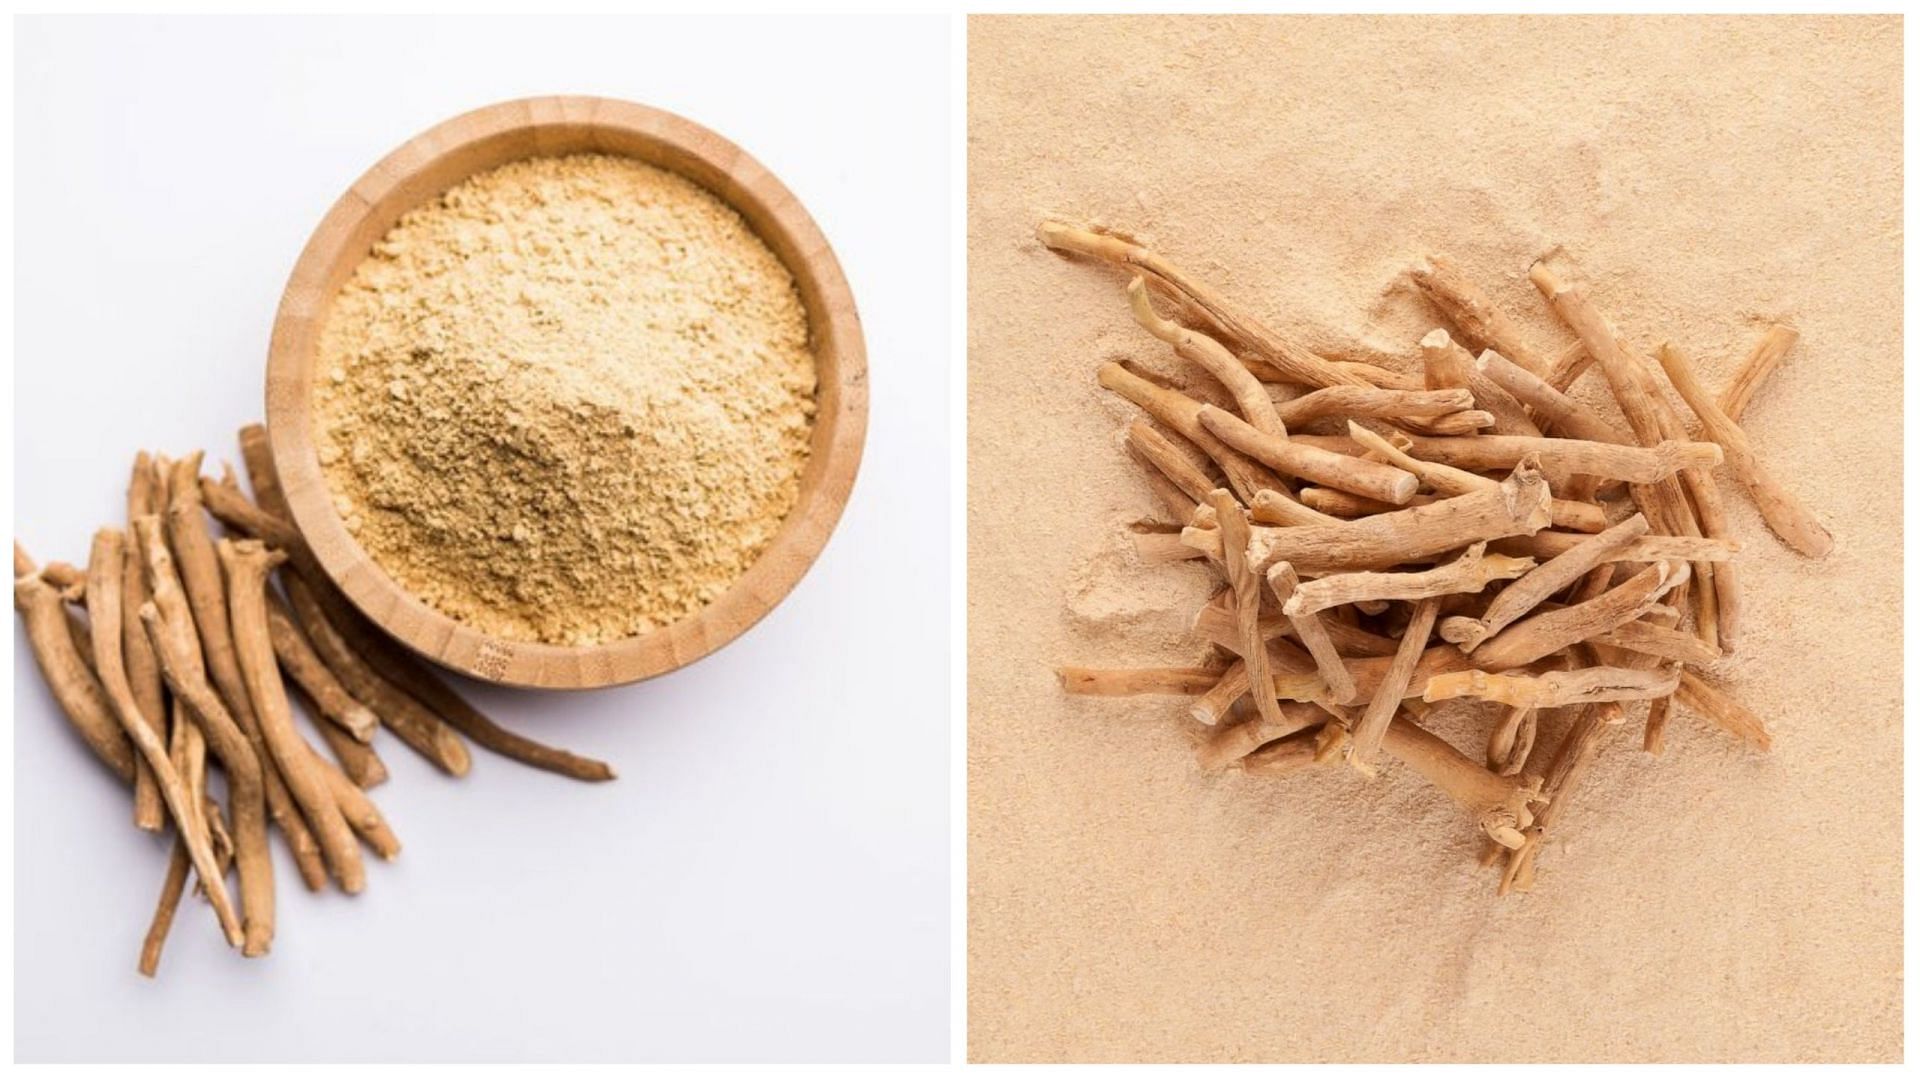 Ashwagandha can help you deal with stress and anxiety. (Image via Instagram @8oayurveda)